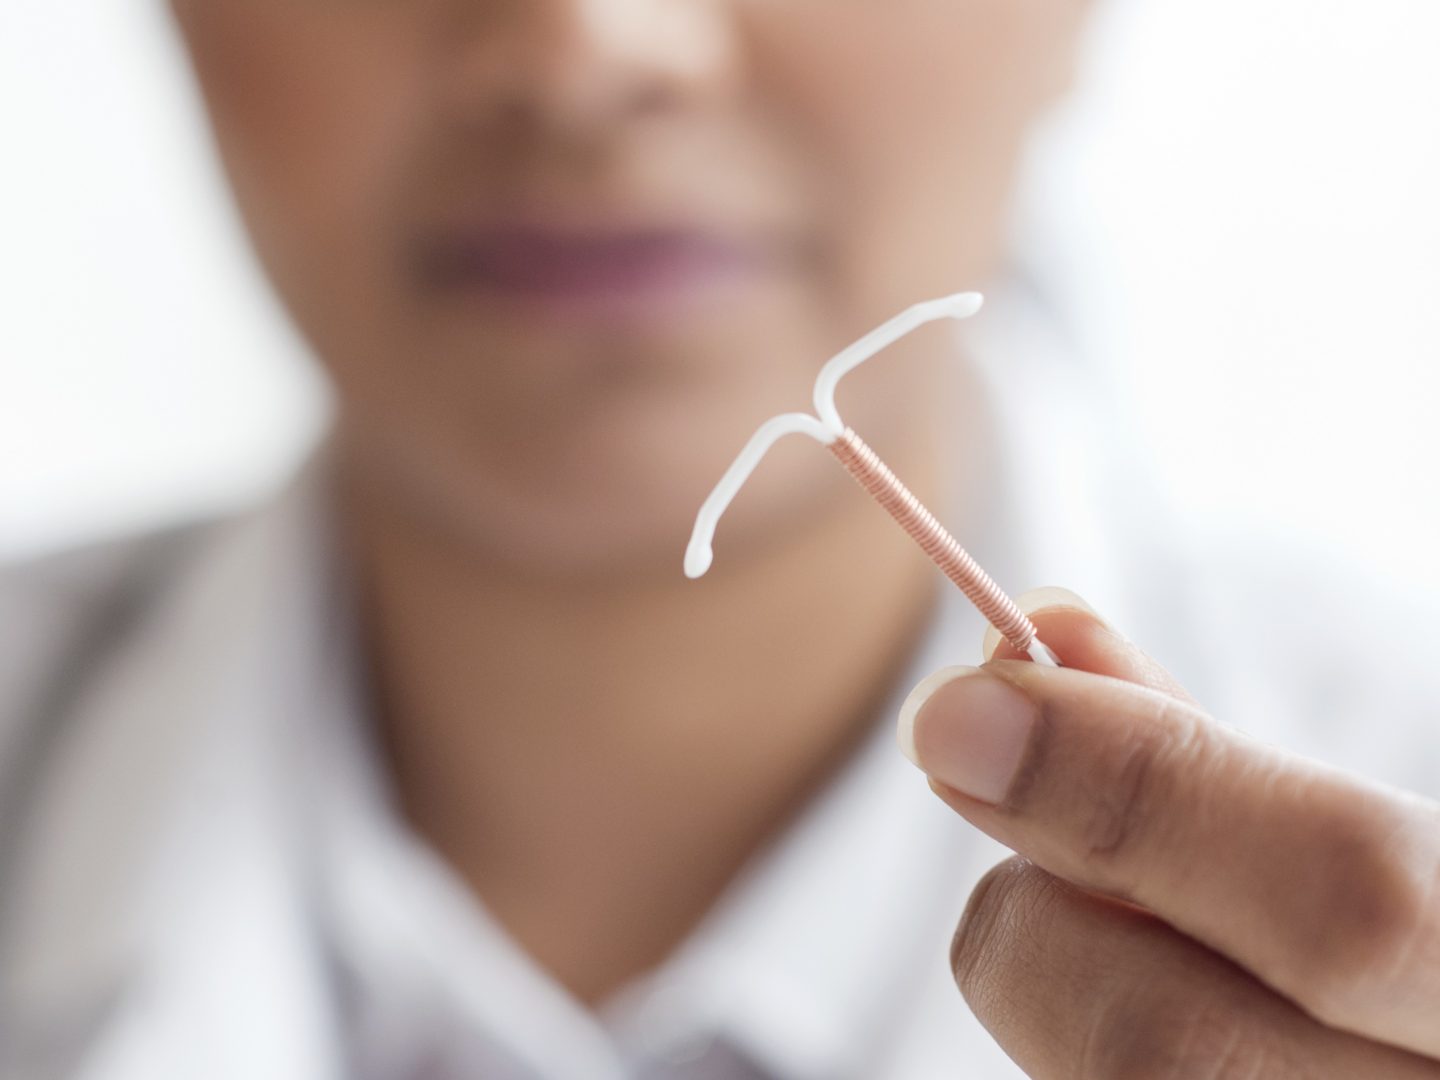 Copper IUDs are a highly effective method of contraception. Some abortion rights opponents express moral objections to IUDs and other birth control methods.